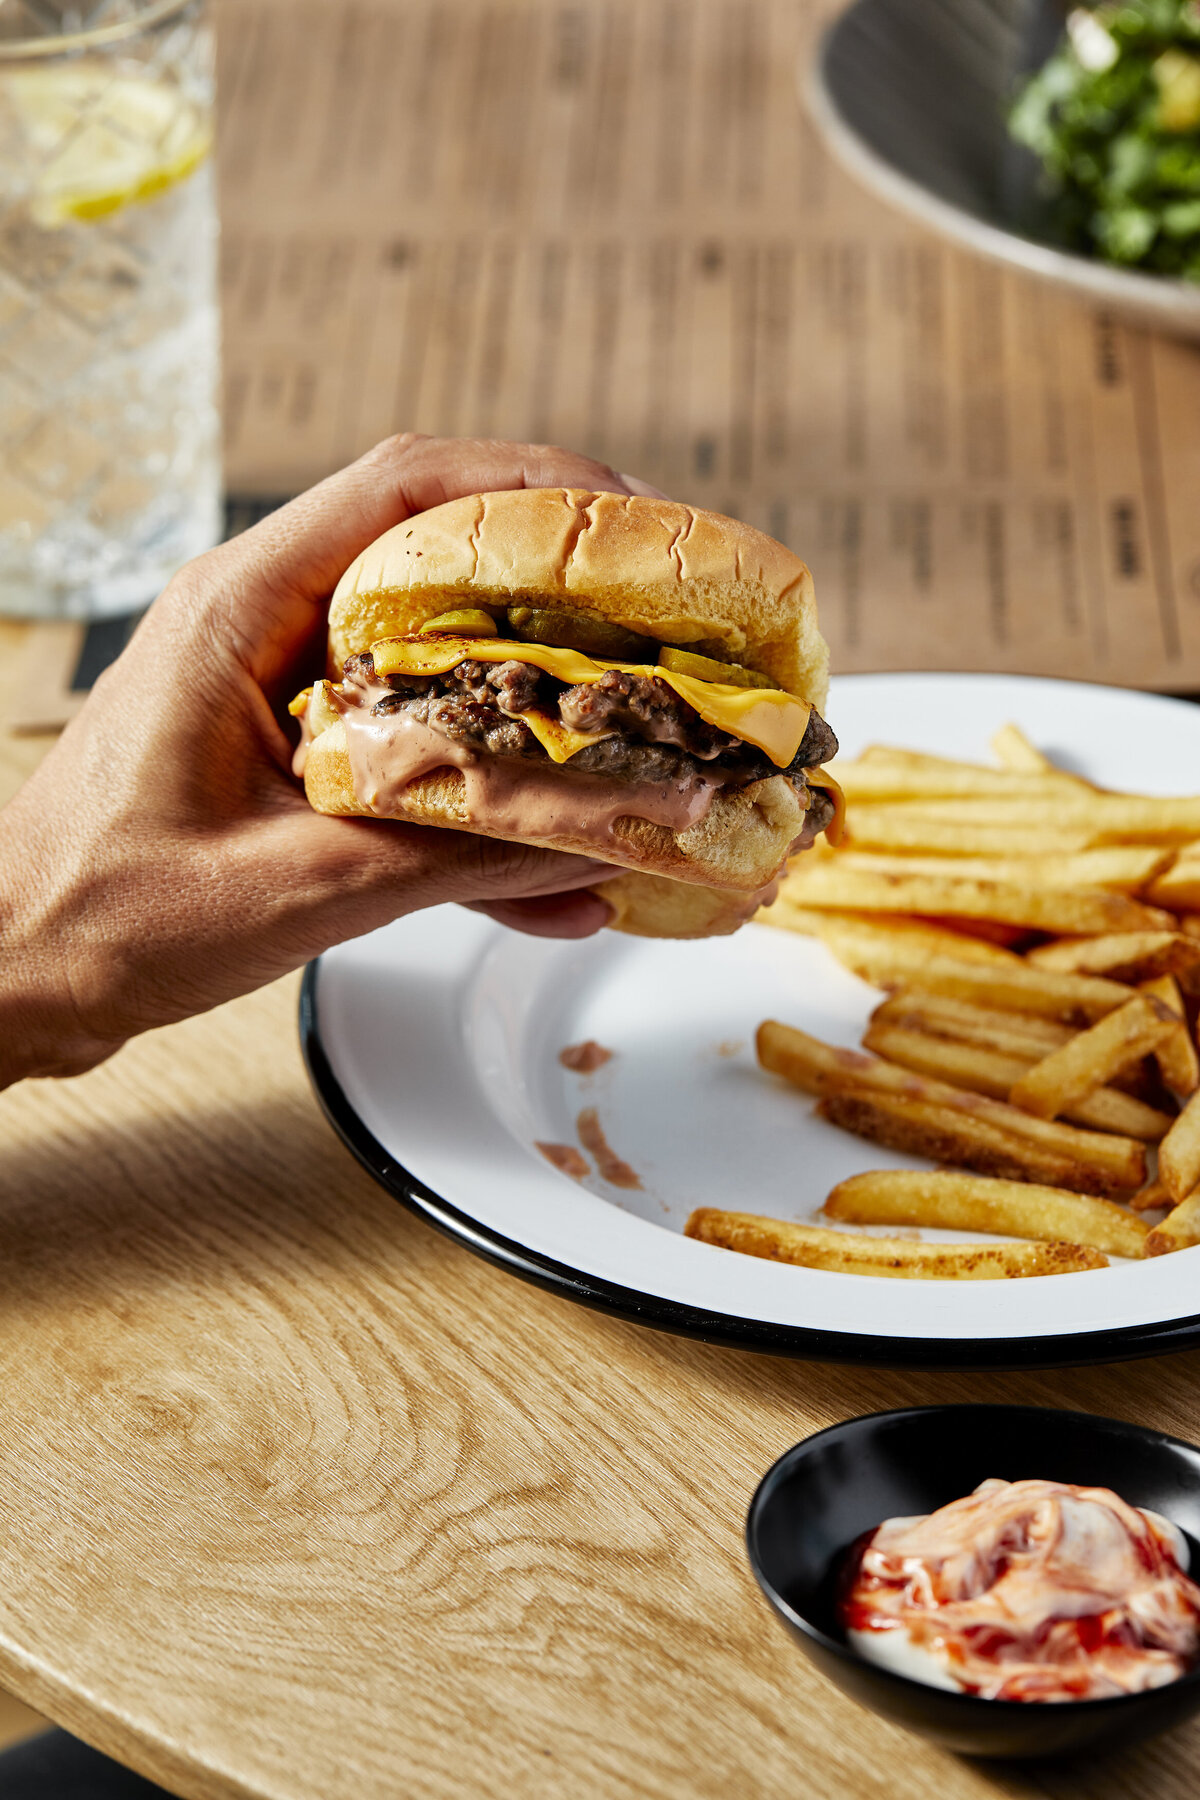 A hand holding a sandwich over a plate of fries.